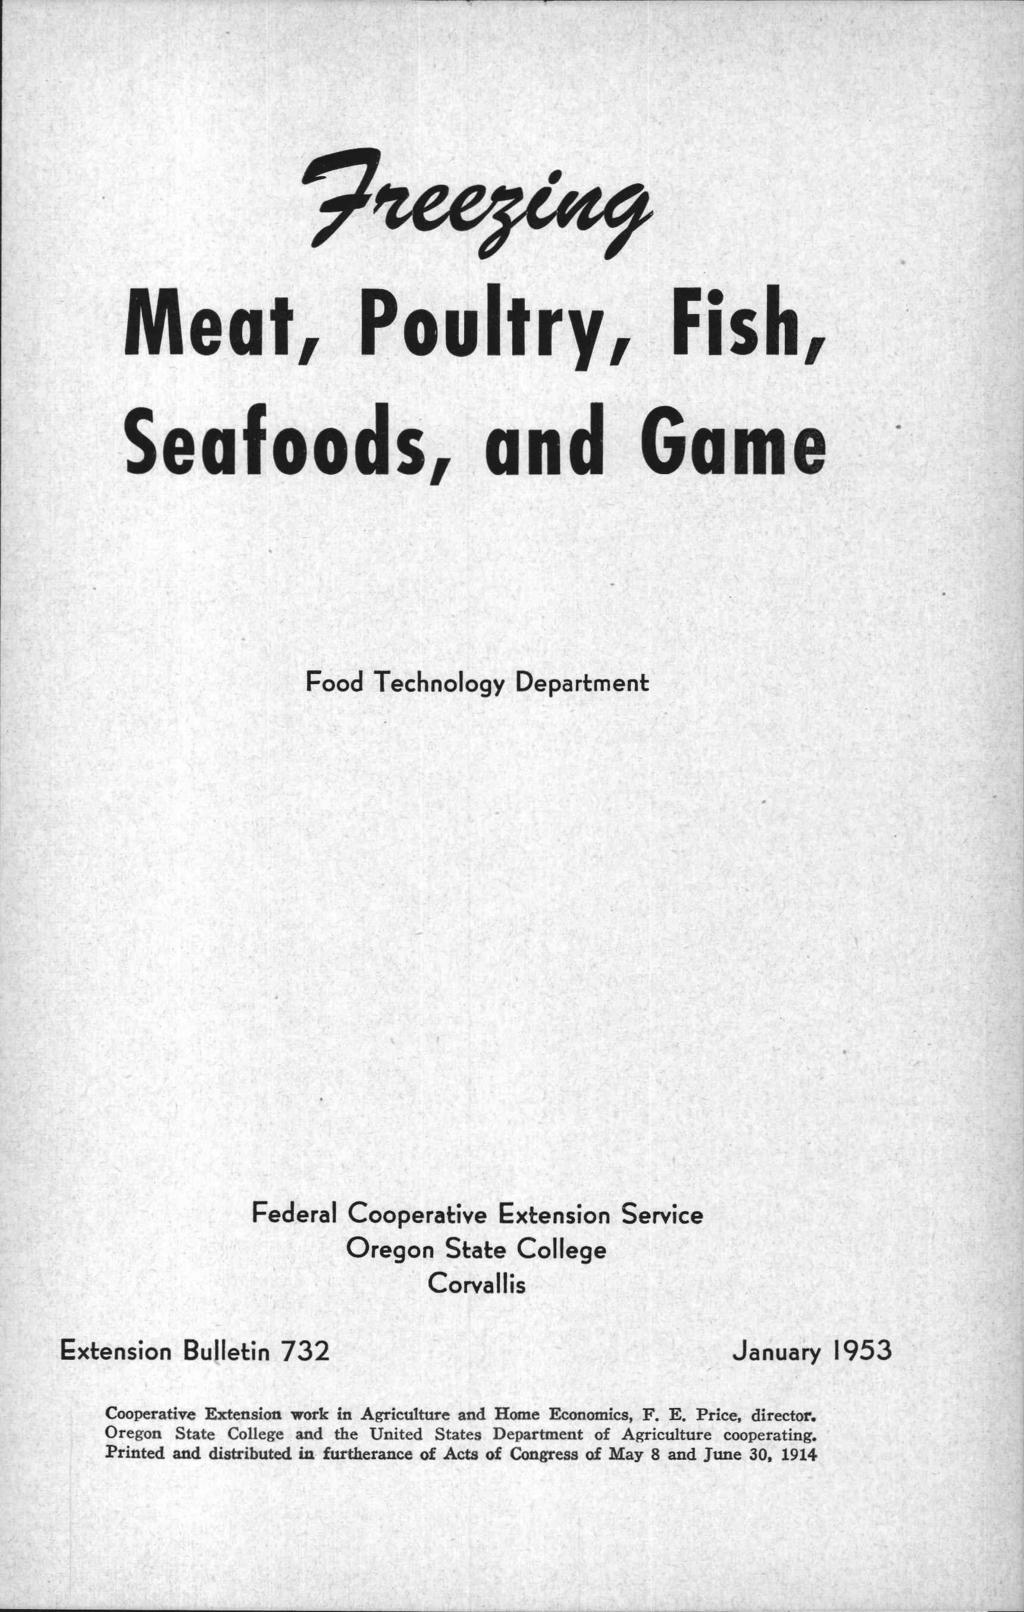 9tee7/649 Meat, Poultry, Fish, Seafoods, and Game Food Technology Department Federal Cooperative Extension Service Oregon State College Corvallis Extension Bulletin 732 January 1953 Cooperative